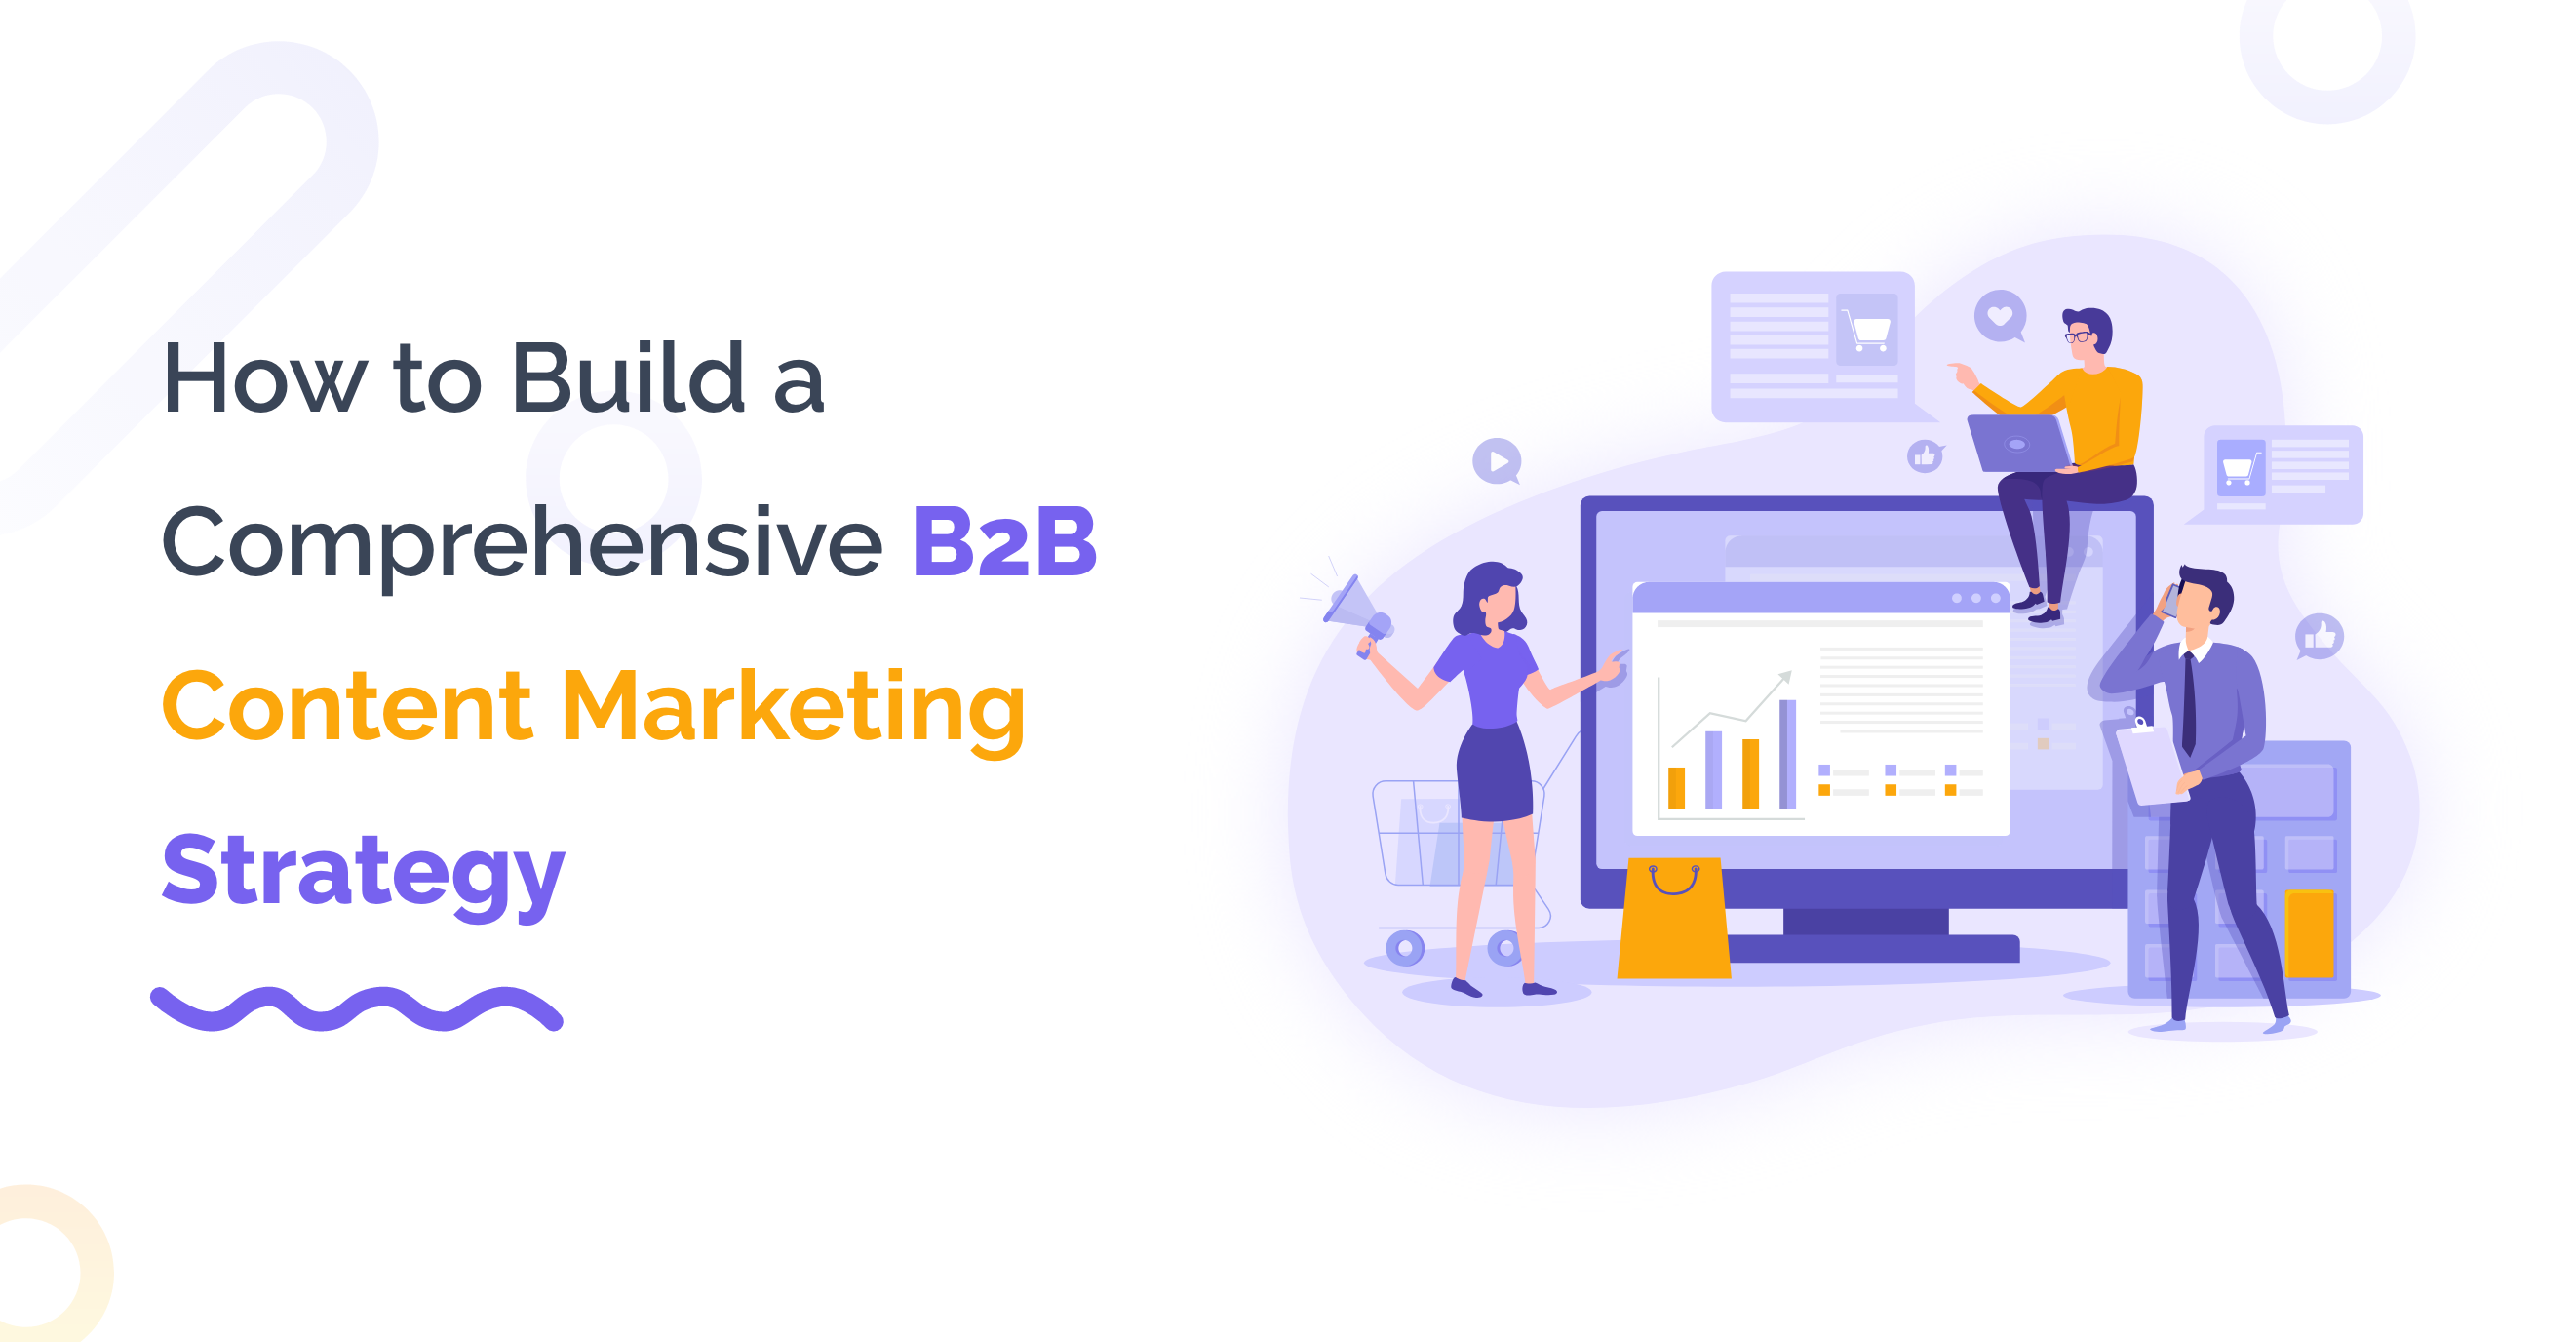 How to Build a Comprehensive B2B Content Marketing Strategy